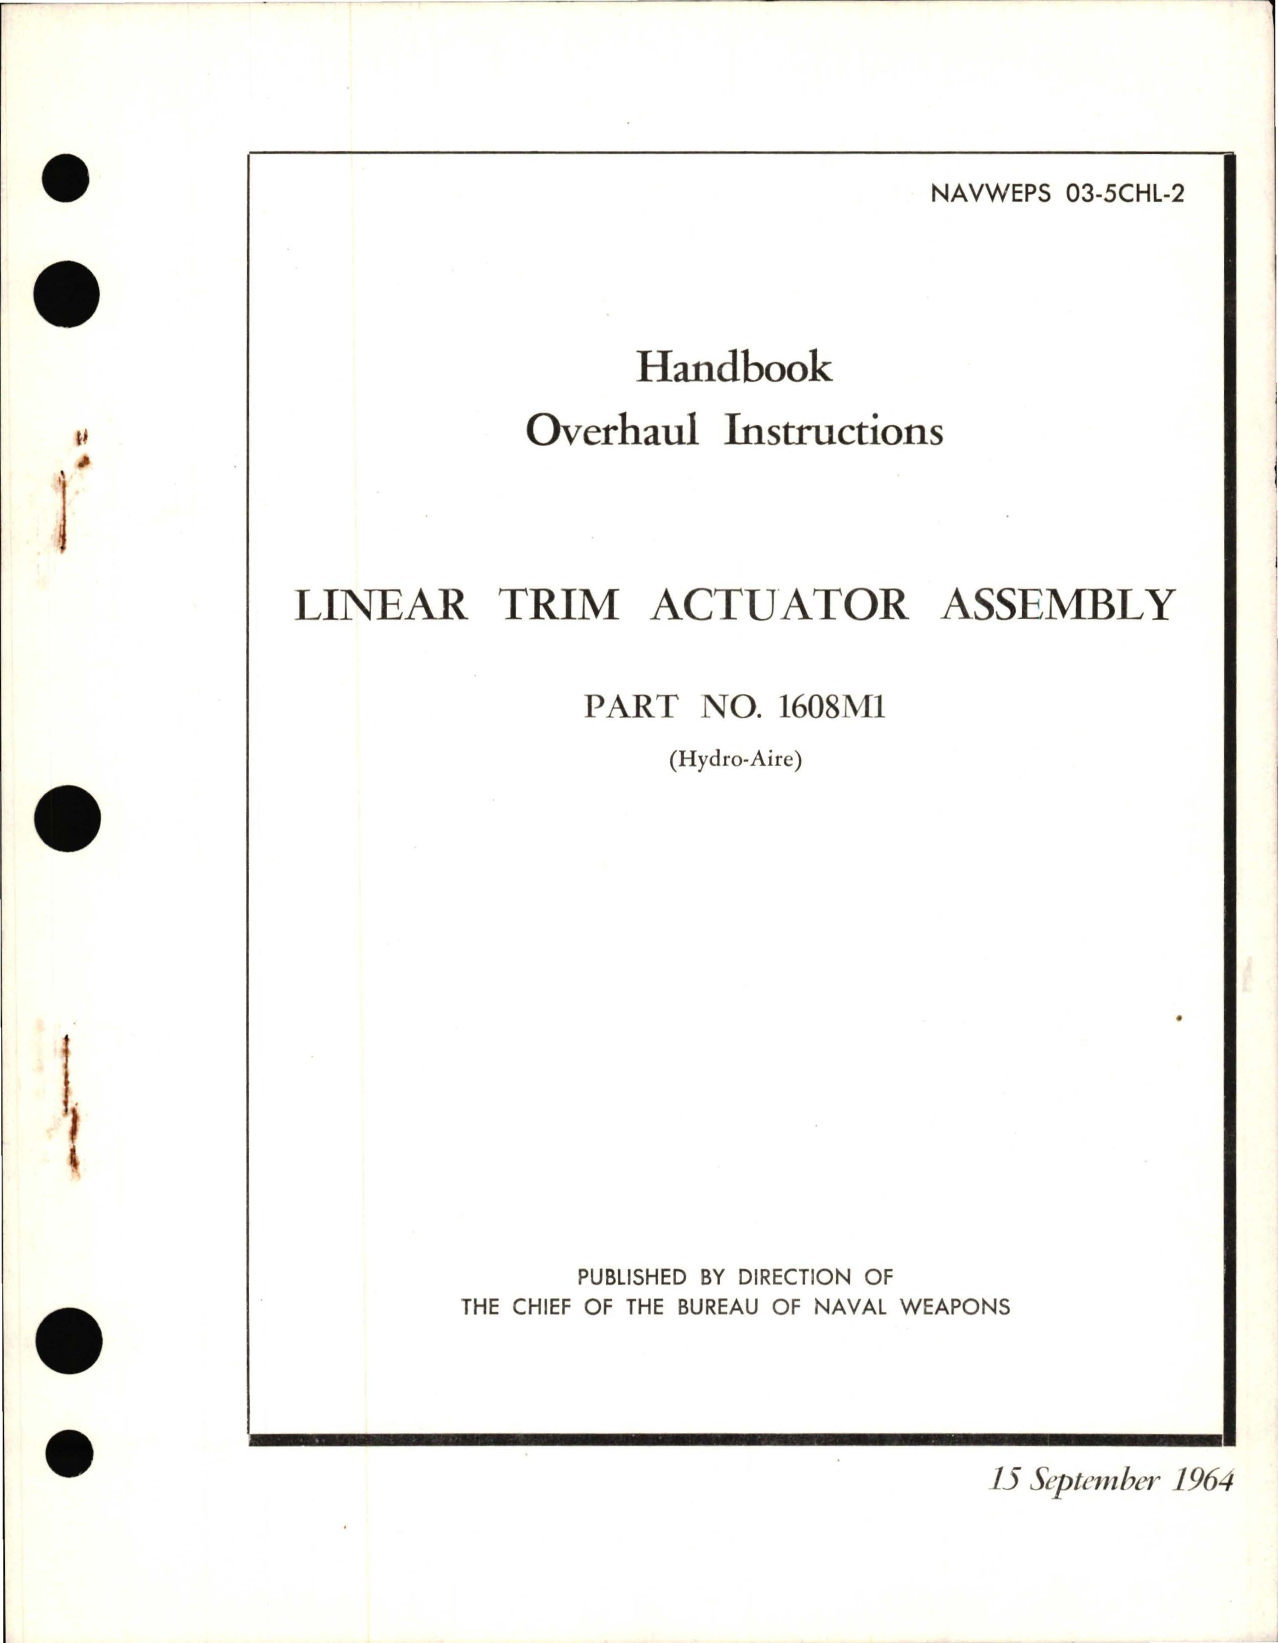 Sample page 1 from AirCorps Library document: Overhaul Instructions for Linear Trim Actuator Assembly 1608M1